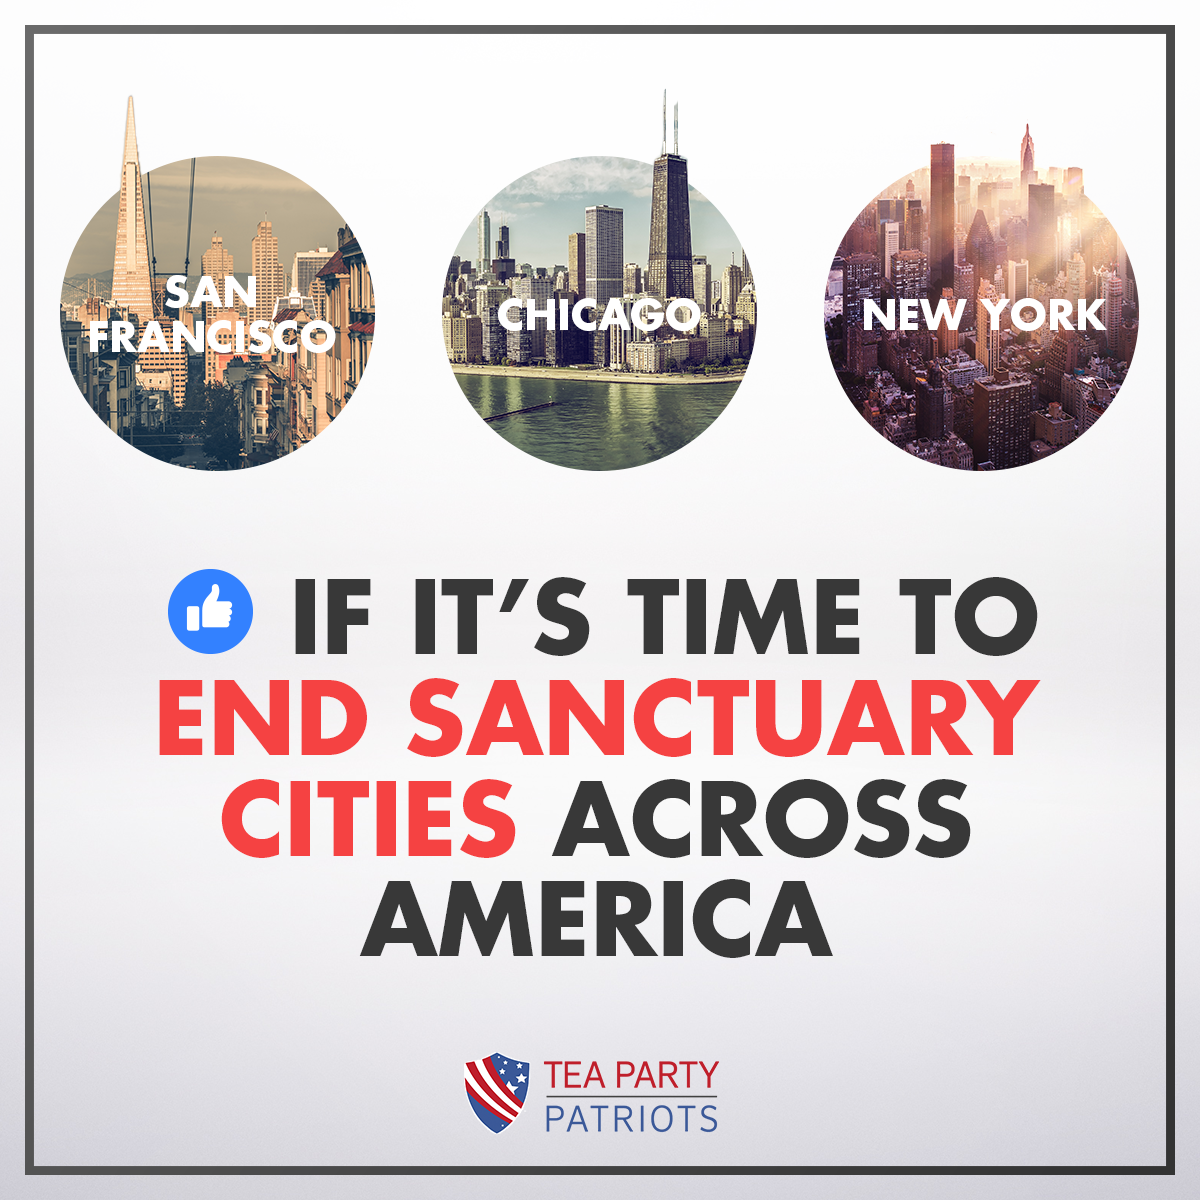 Photo of poll taken by the Tea Party Patriots regarding the controversial issue of sanctuary cities. Interest groups often arise from what is known as the 